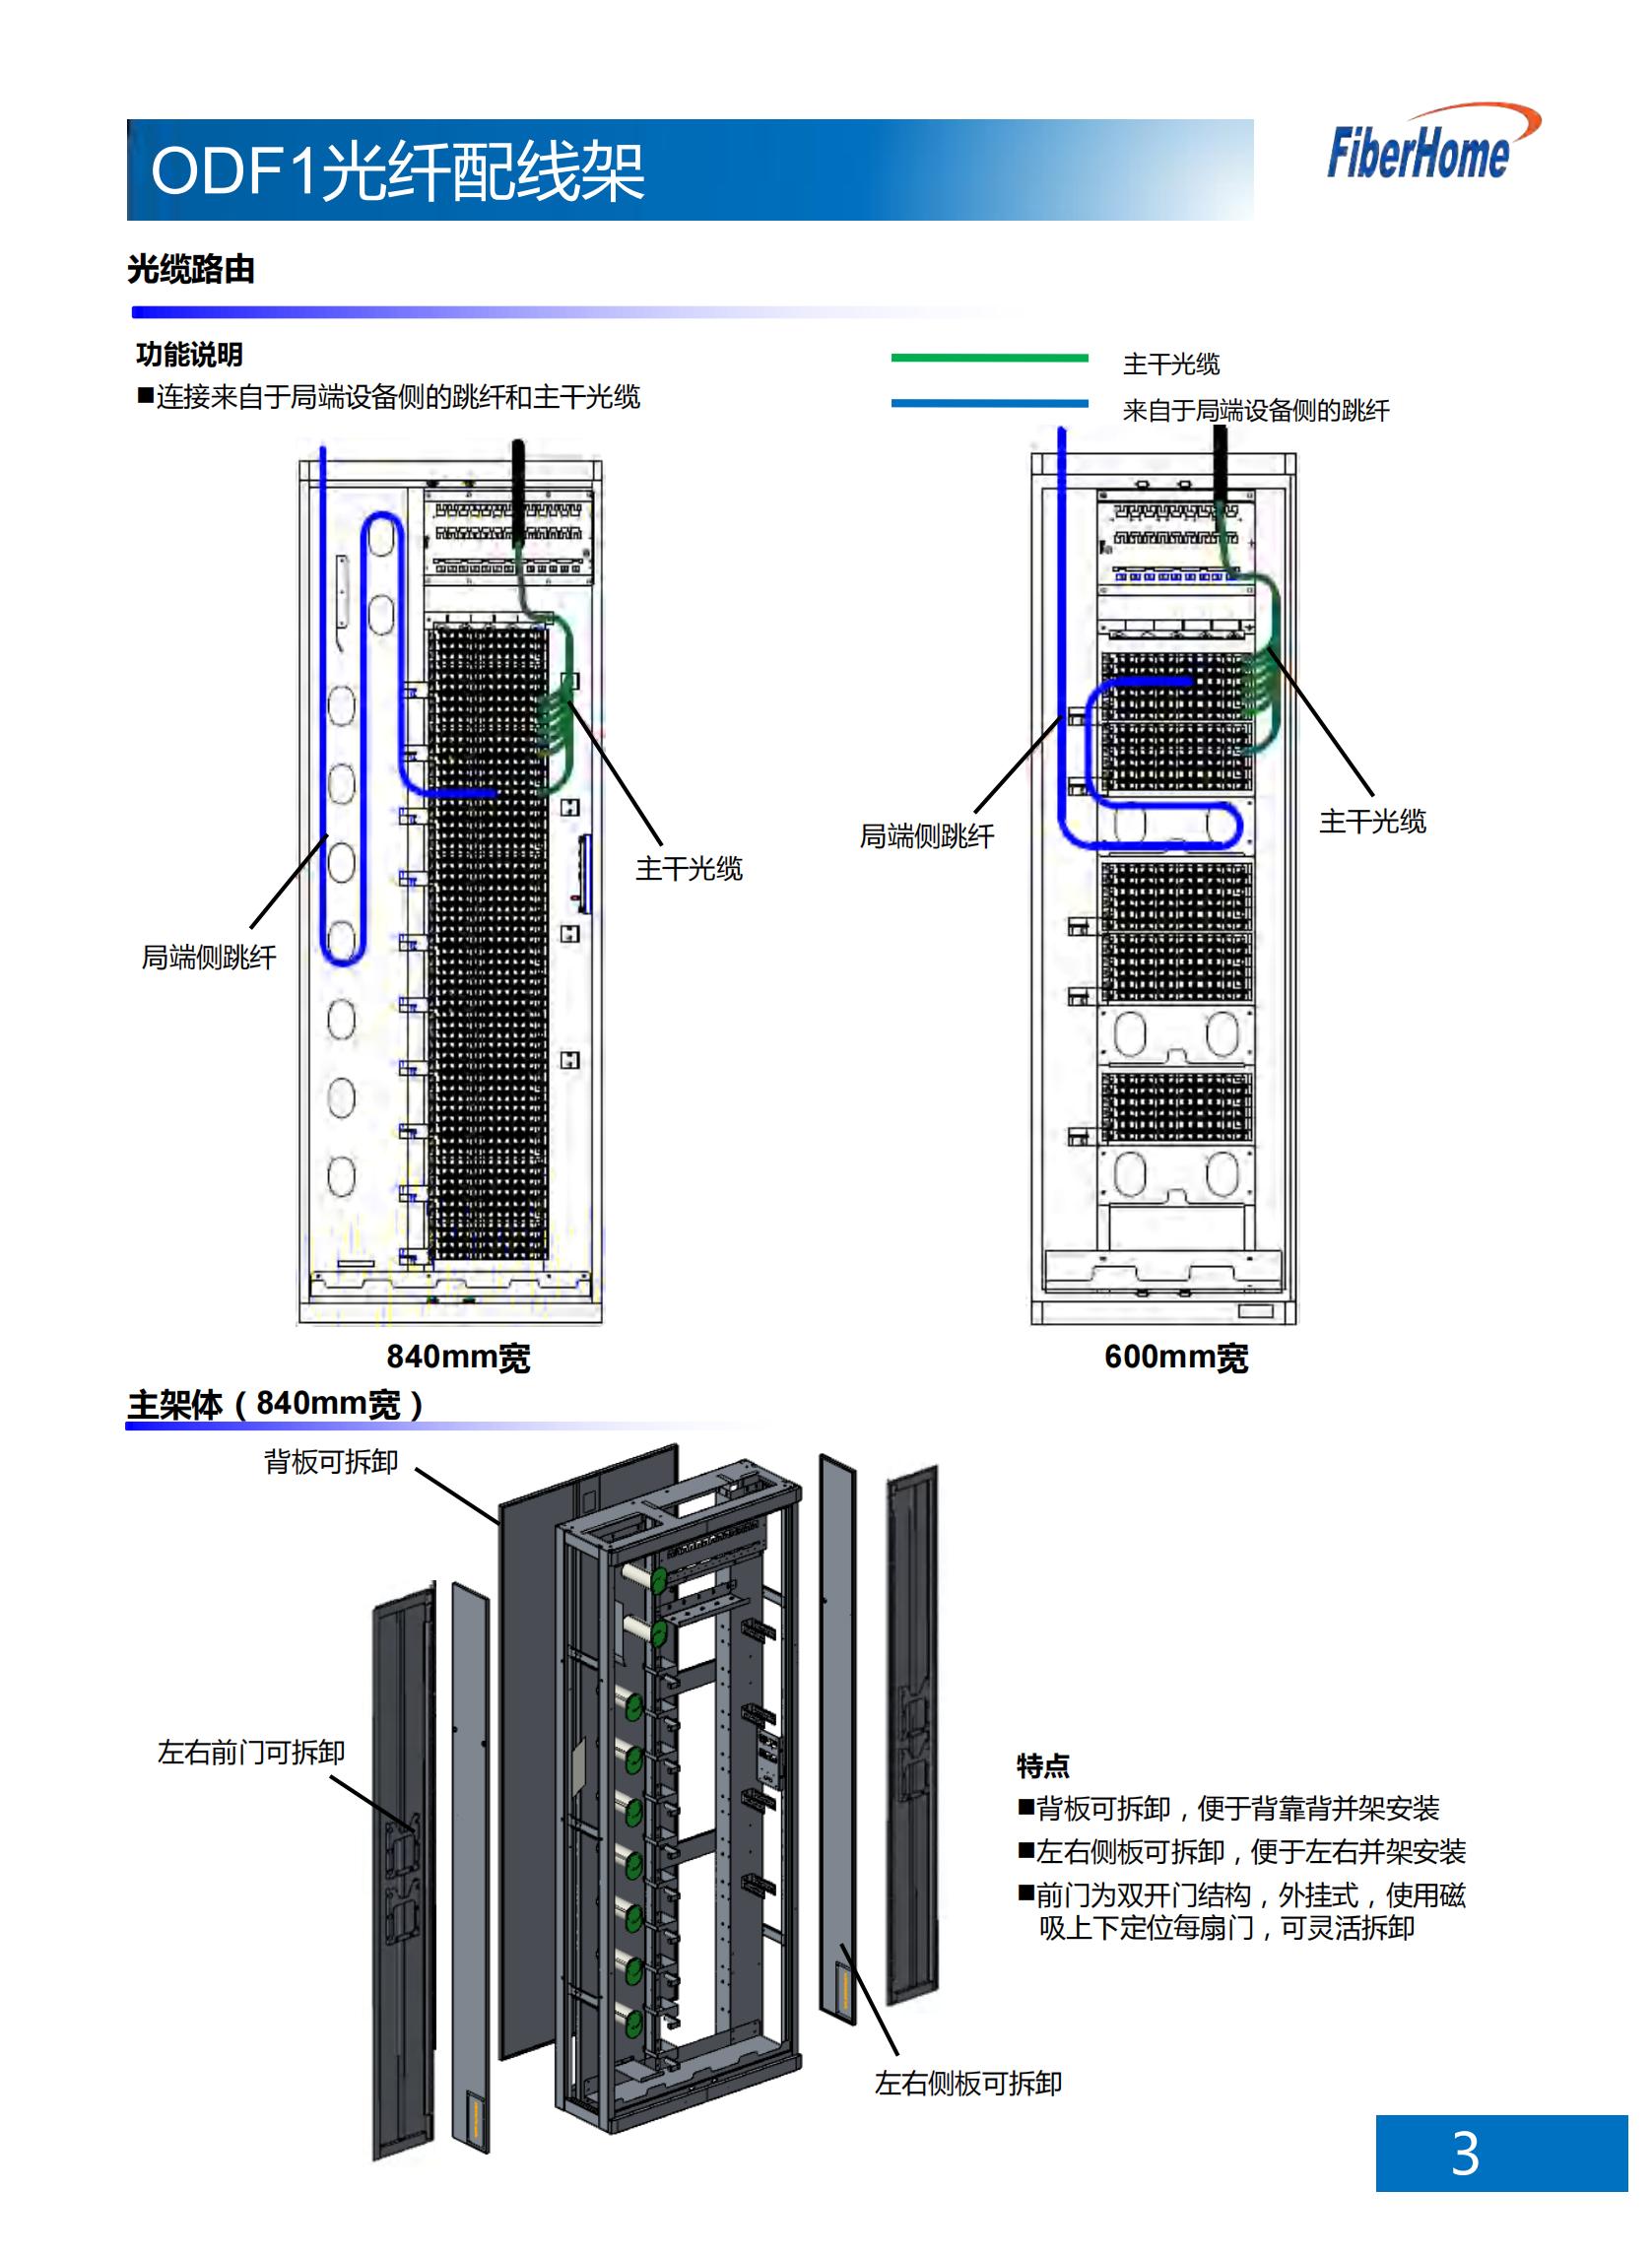 ODF101-576-A6-LC ODF optical fiber distribution frame (288-core floor-standing all include 24-core LC fusion integration unit)